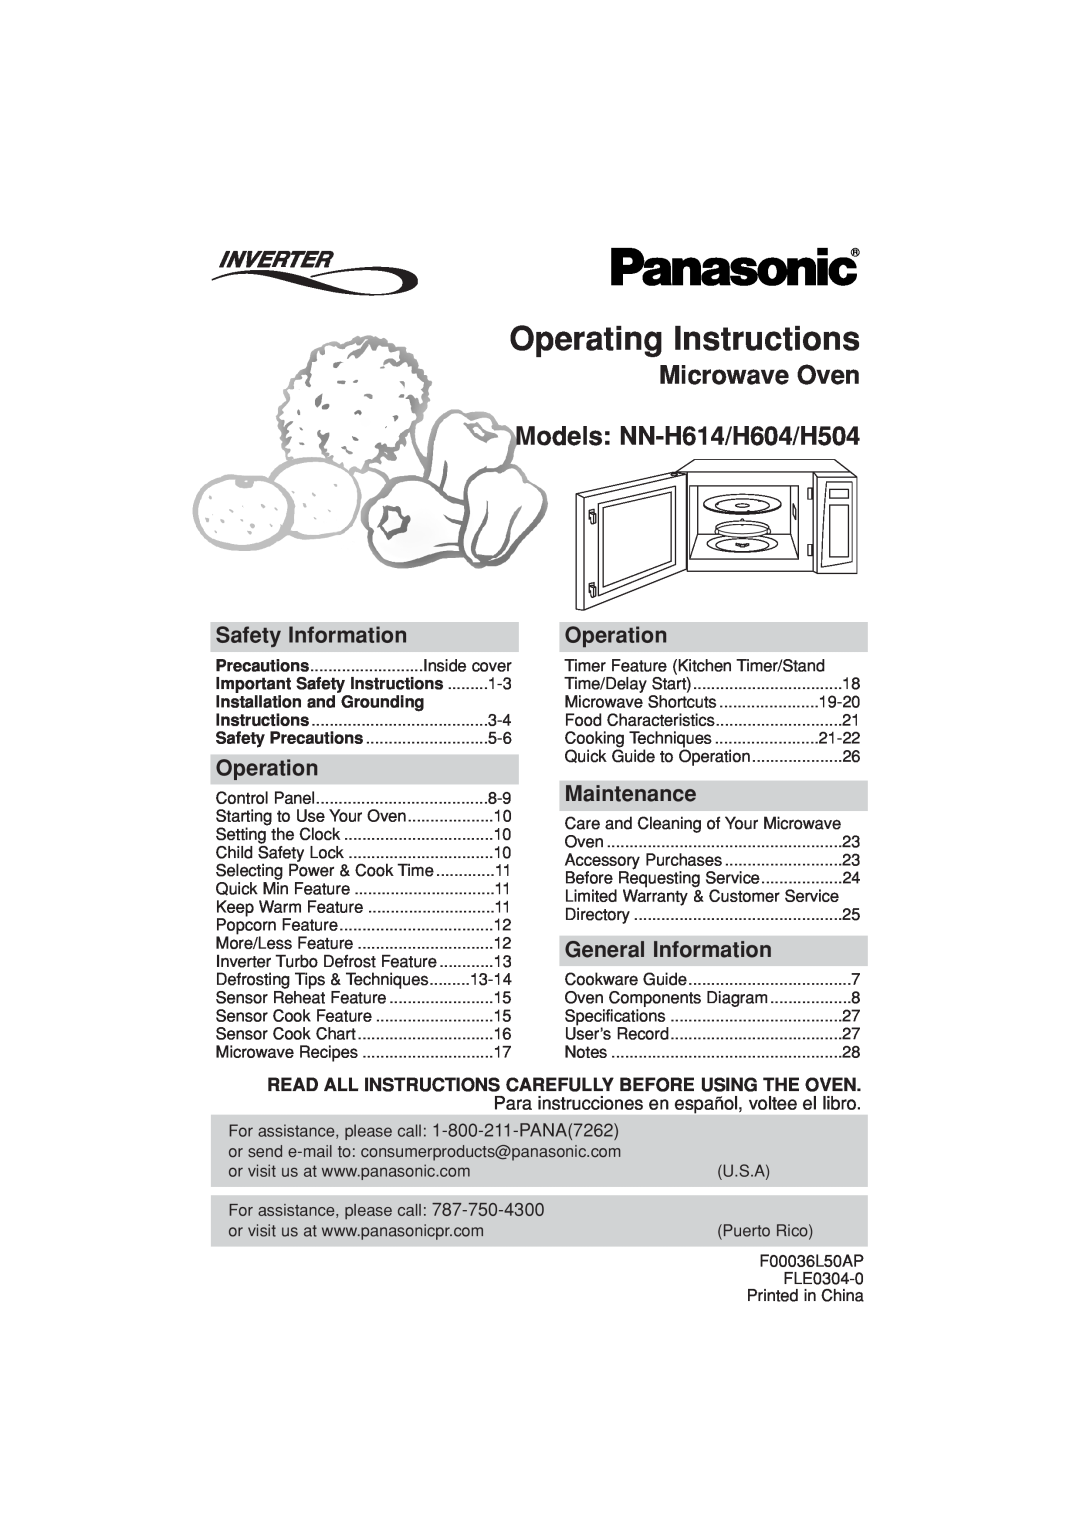 Panasonic NN-H604 important safety instructions Operating Instructions, Microwave Oven Models NN-H614/H604/H504, Operation 